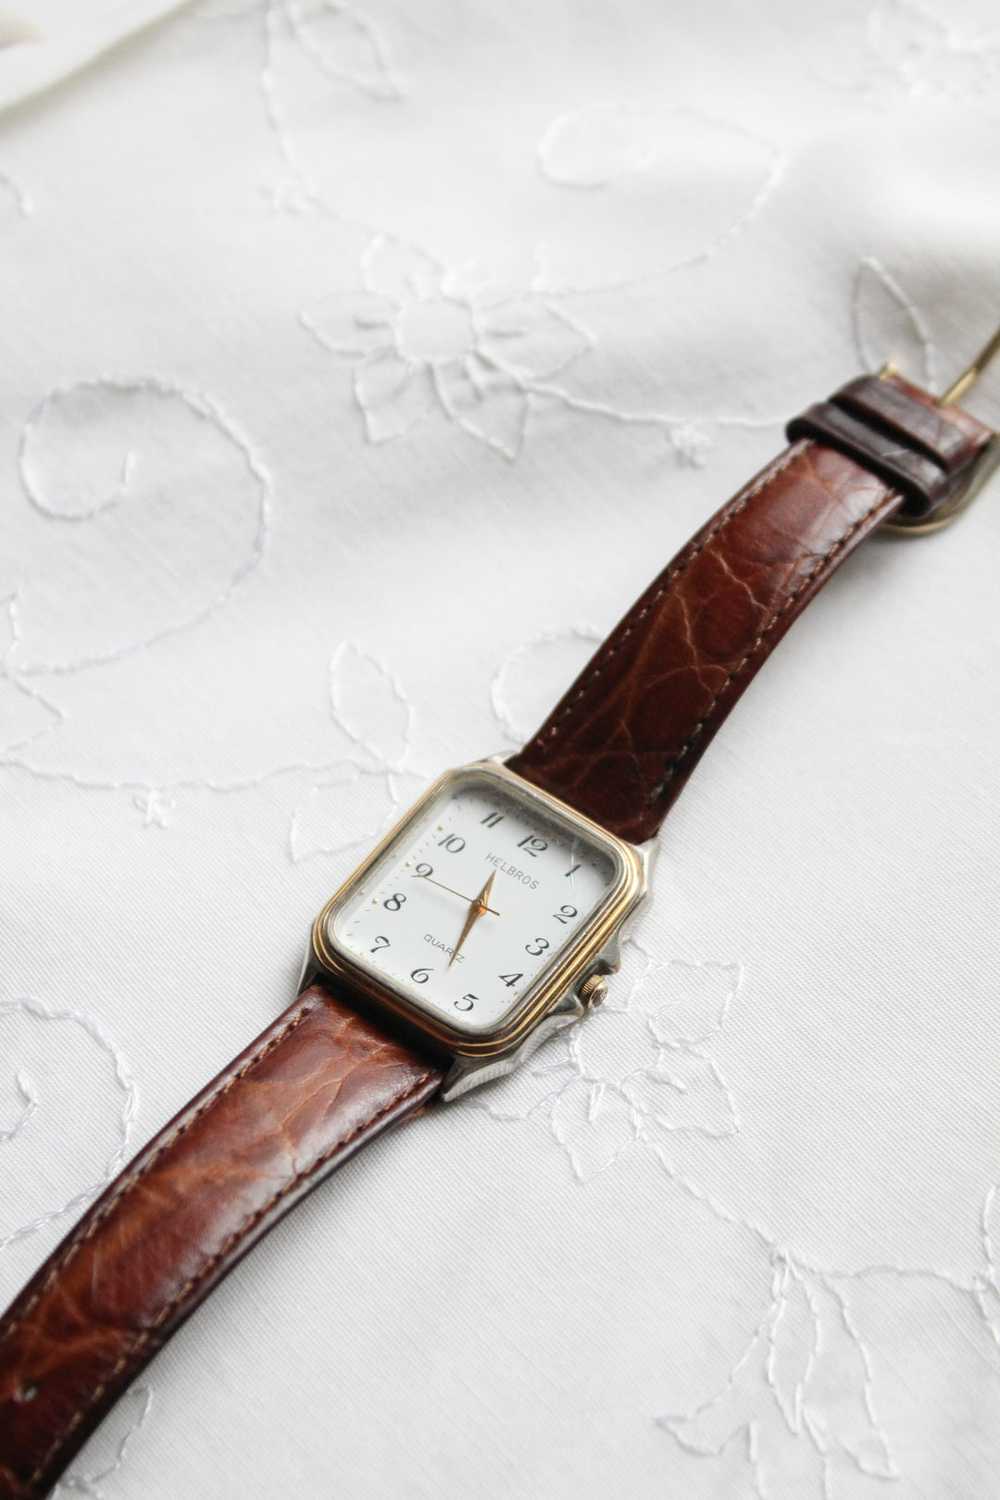 leather band vintage watch - image 1